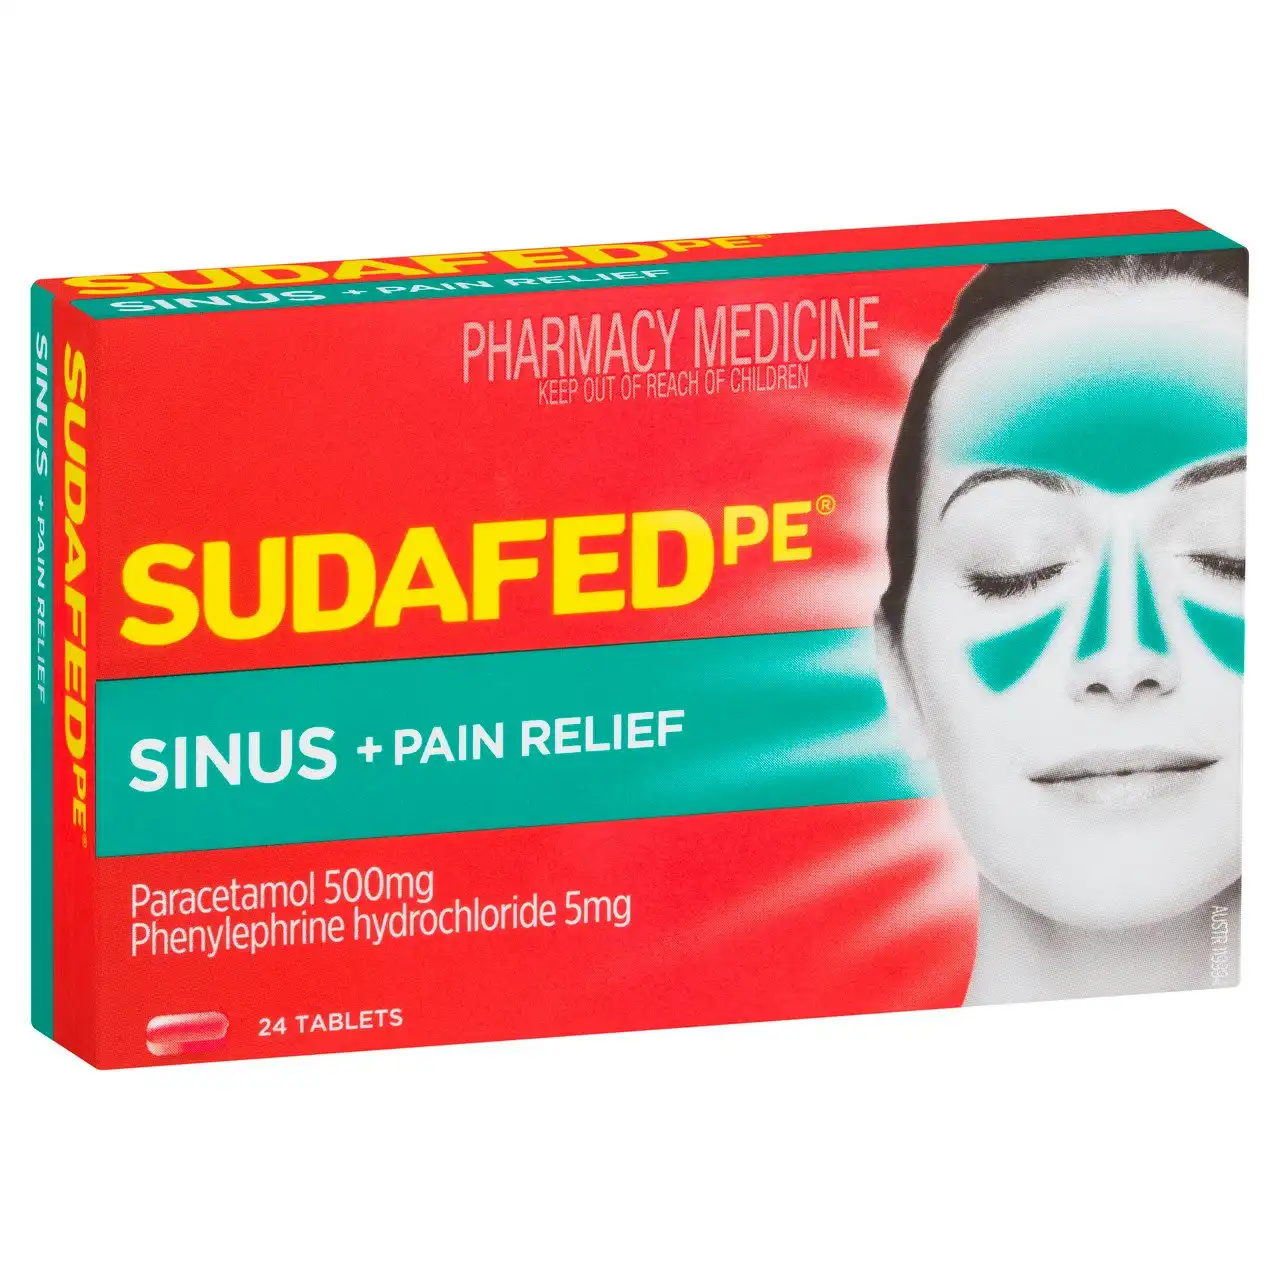 SUDAFED PE Sinus + Pain Relief Tablets 24 Pack